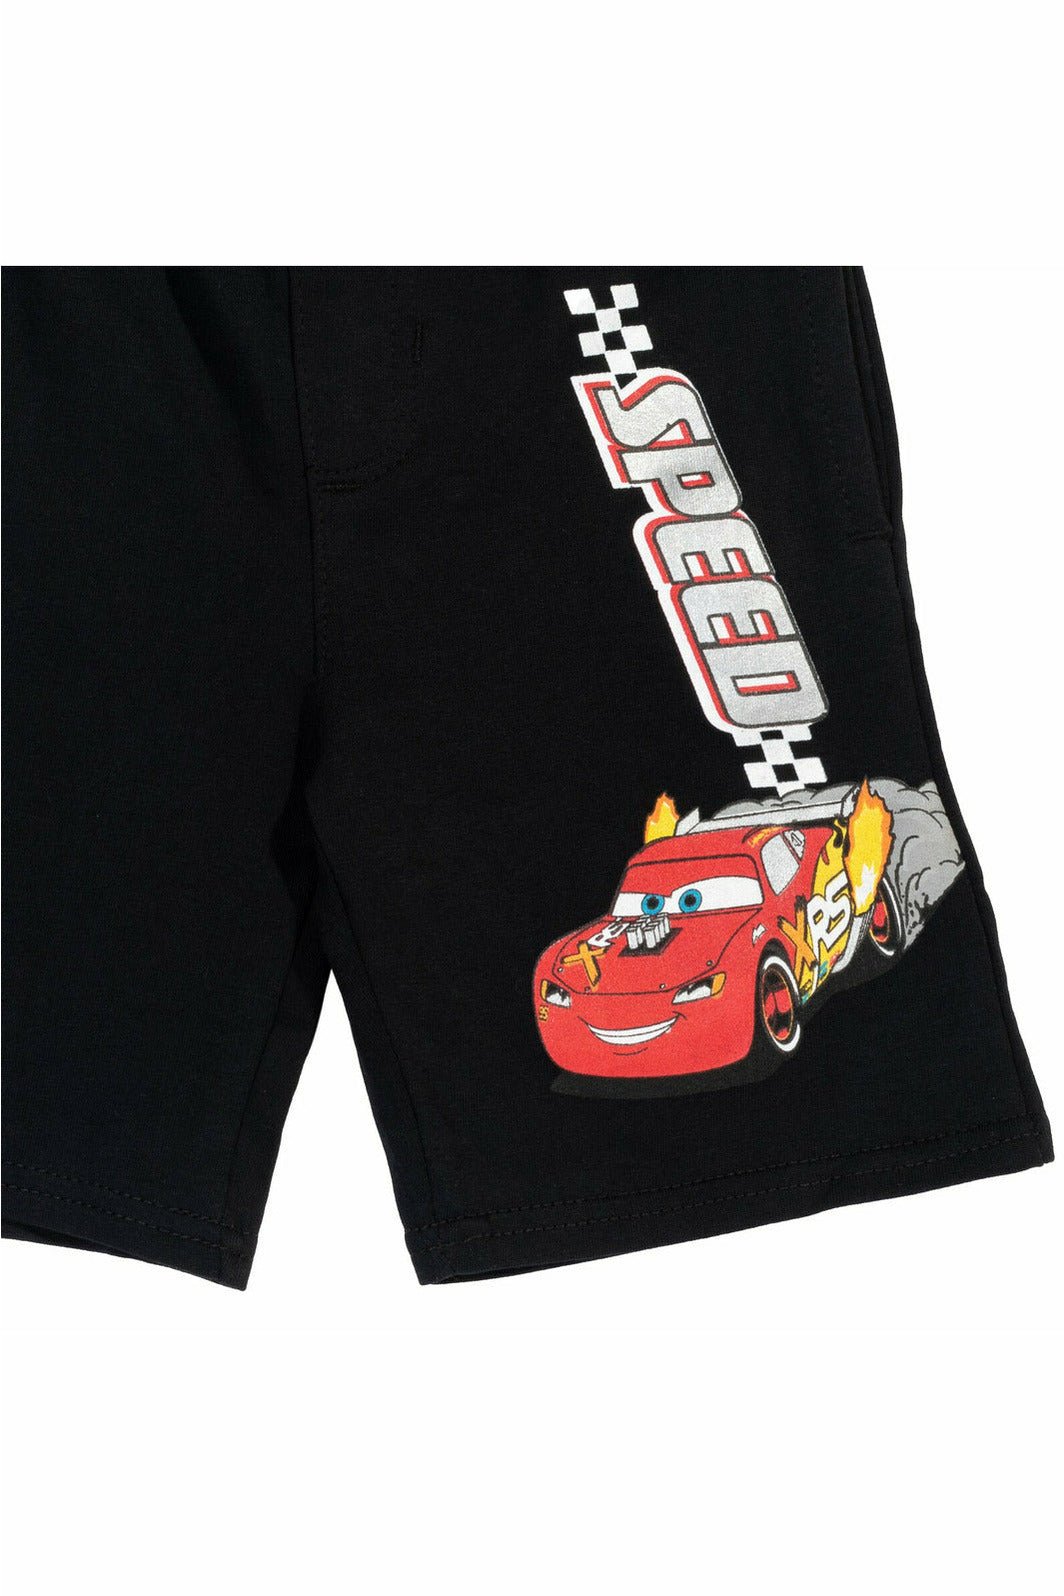 Cars French Terry 2 Pack Shorts - imagikids